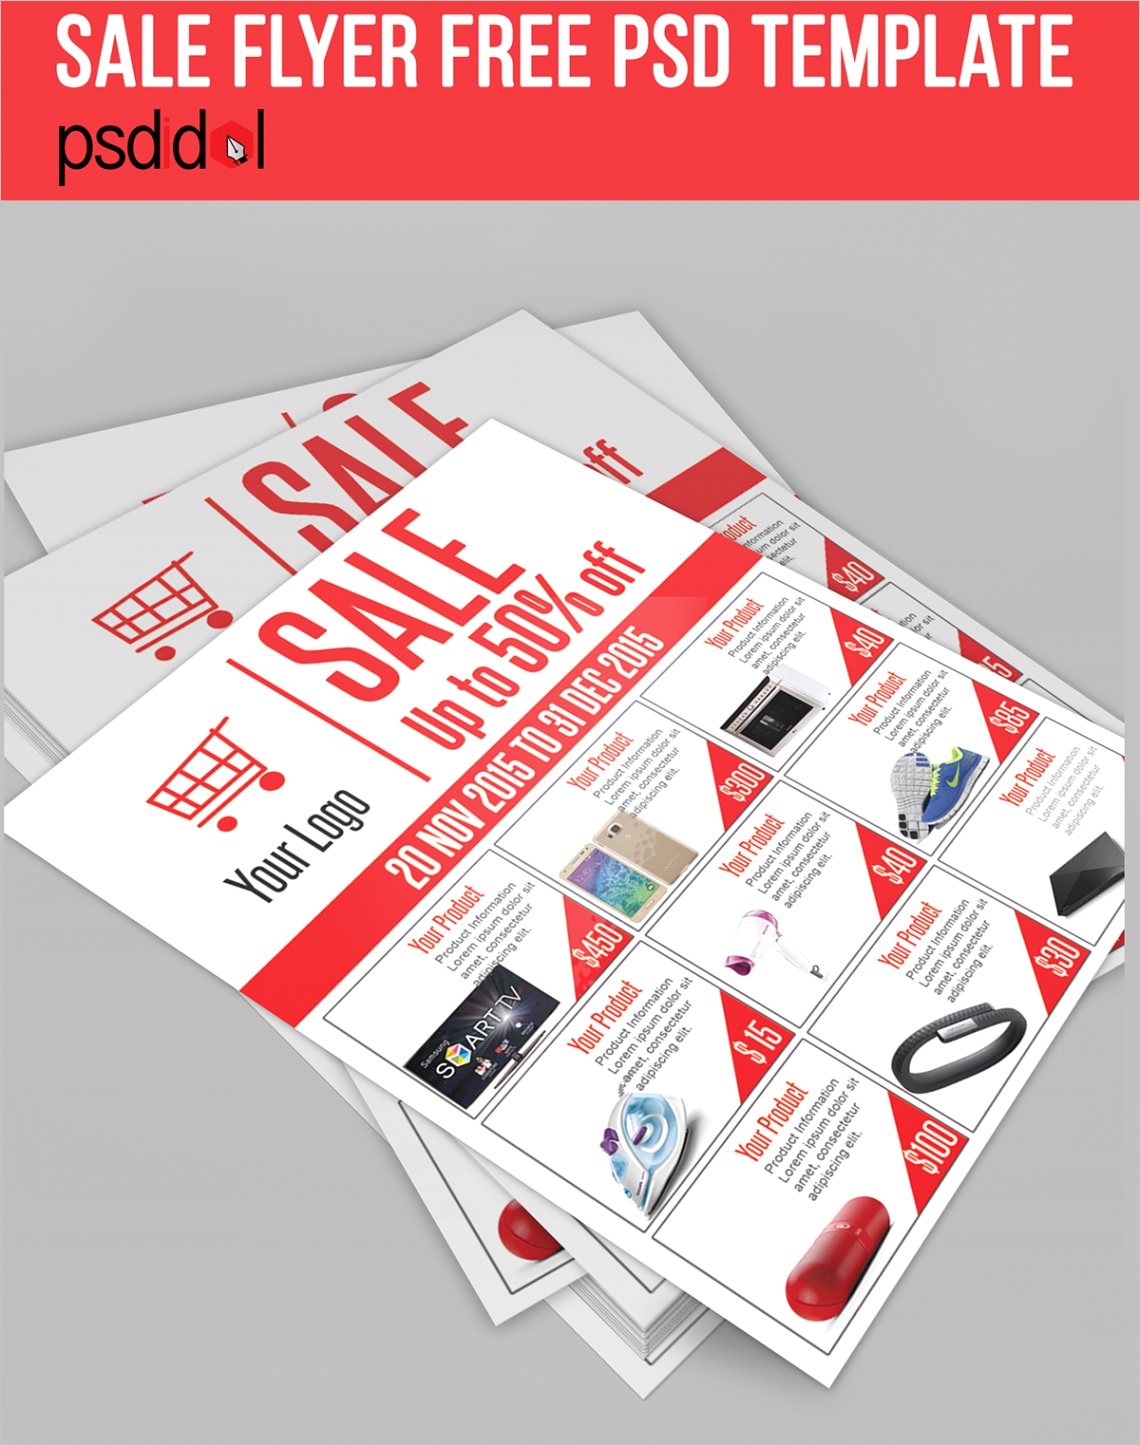 Sale Flyer Free PSD Template Download